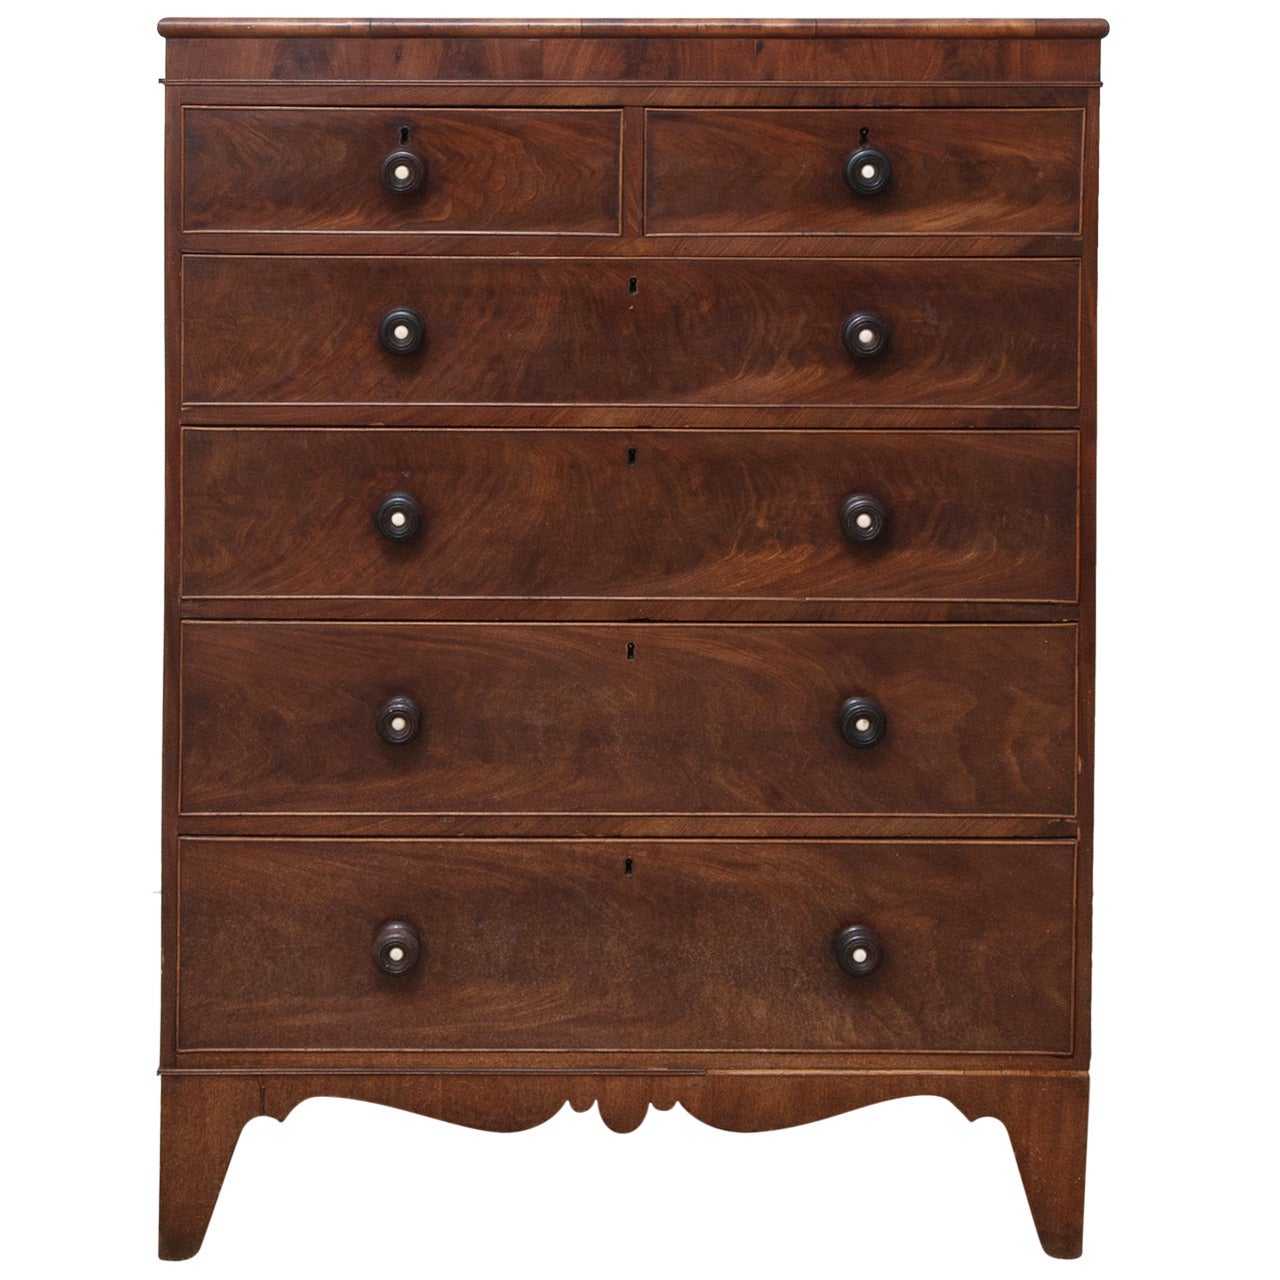 Antique American Tall Chest of Drawers